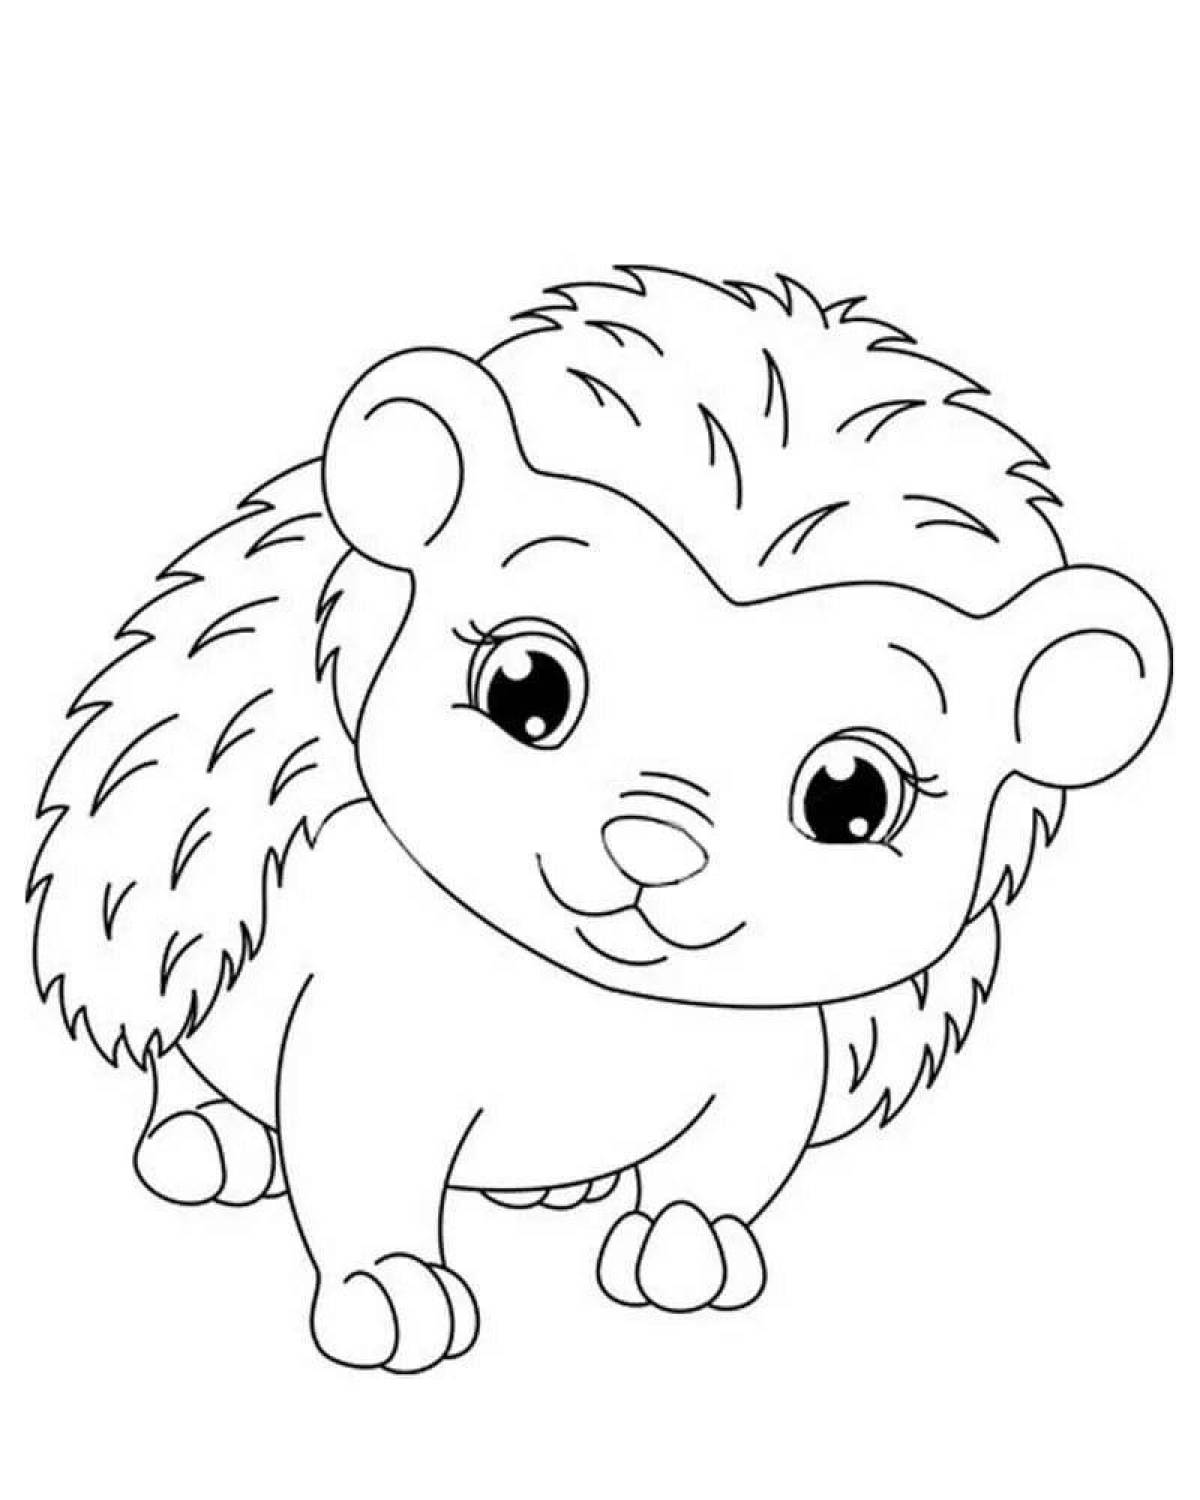 Fun drawing of a hedgehog for kids